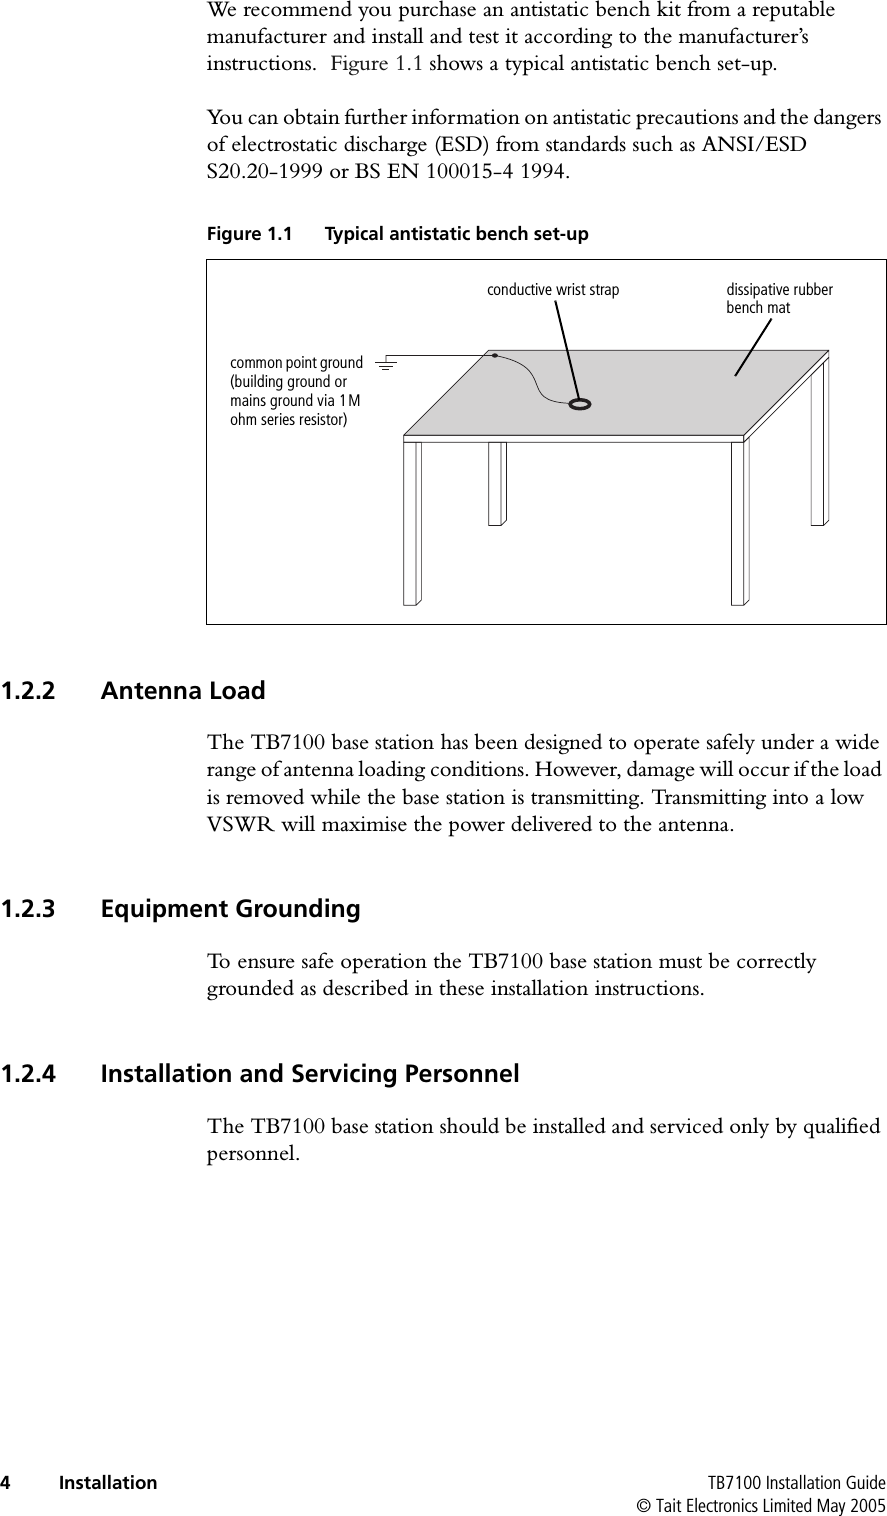  4 Installation TB7100 Installation Guide© Tait Electronics Limited May 2005We recommend you purchase an antistatic bench kit from a reputable manufacturer and install and test it according to the manufacturer’s instructions.  Figure 1.1 shows a typical antistatic bench set-up.You can obtain further information on antistatic precautions and the dangers of electrostatic discharge (ESD) from standards such as ANSI/ESD S20.20-1999 or BS EN 100015-4 1994. 1.2.2 Antenna LoadThe TB7100 base station has been designed to operate safely under a wide range of antenna loading conditions. However, damage will occur if the load is removed while the base station is transmitting. Transmitting into a low VSWR will maximise the power delivered to the antenna.1.2.3 Equipment GroundingTo ensure safe operation the TB7100 base station must be correctly grounded as described in these installation instructions.1.2.4 Installation and Servicing PersonnelThe TB7100 base station should be installed and serviced only by qualified personnel.Figure 1.1 Typical antistatic bench set-upcommon point ground (building ground or mains ground via 1M ohm series resistor)conductive wrist strap dissipative rubber bench mat